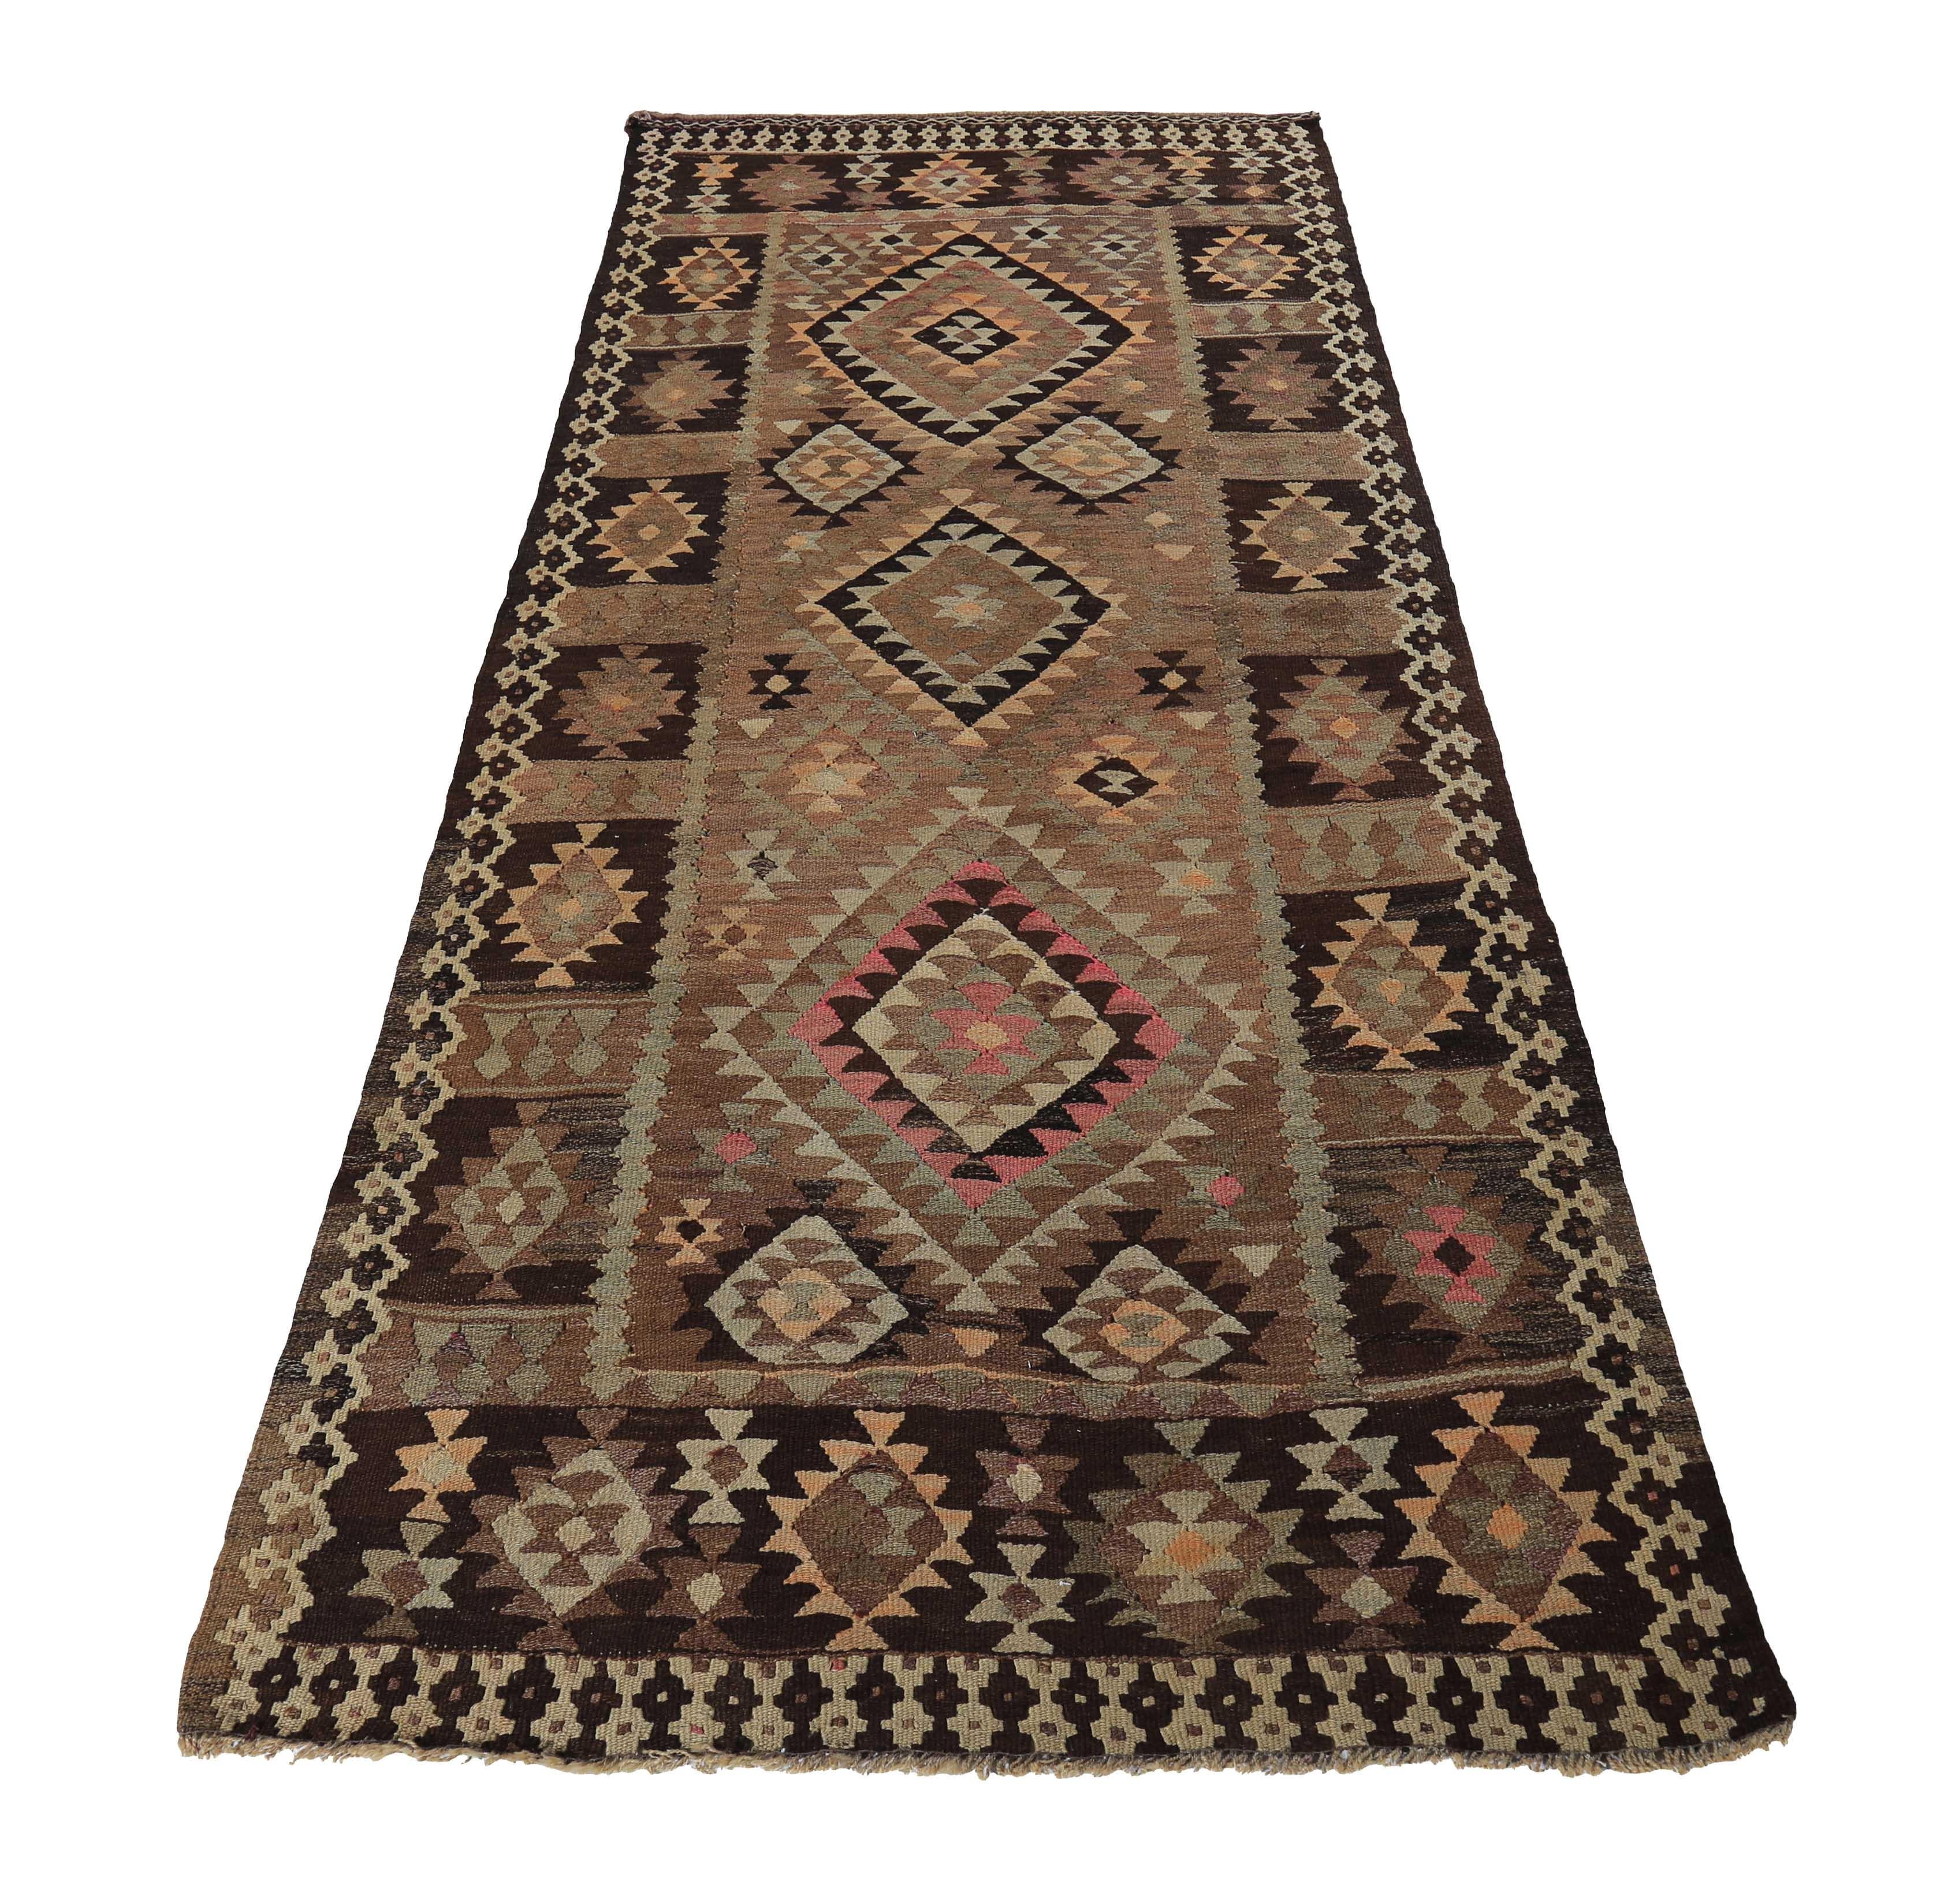 Turkish rug handwoven from the finest sheep’s wool and colored with all-natural vegetable dyes that are safe for humans and pets. It’s a traditional Kilim flat-weave design featuring pink and ivory medallions on a rich brown field. It’s a stunning